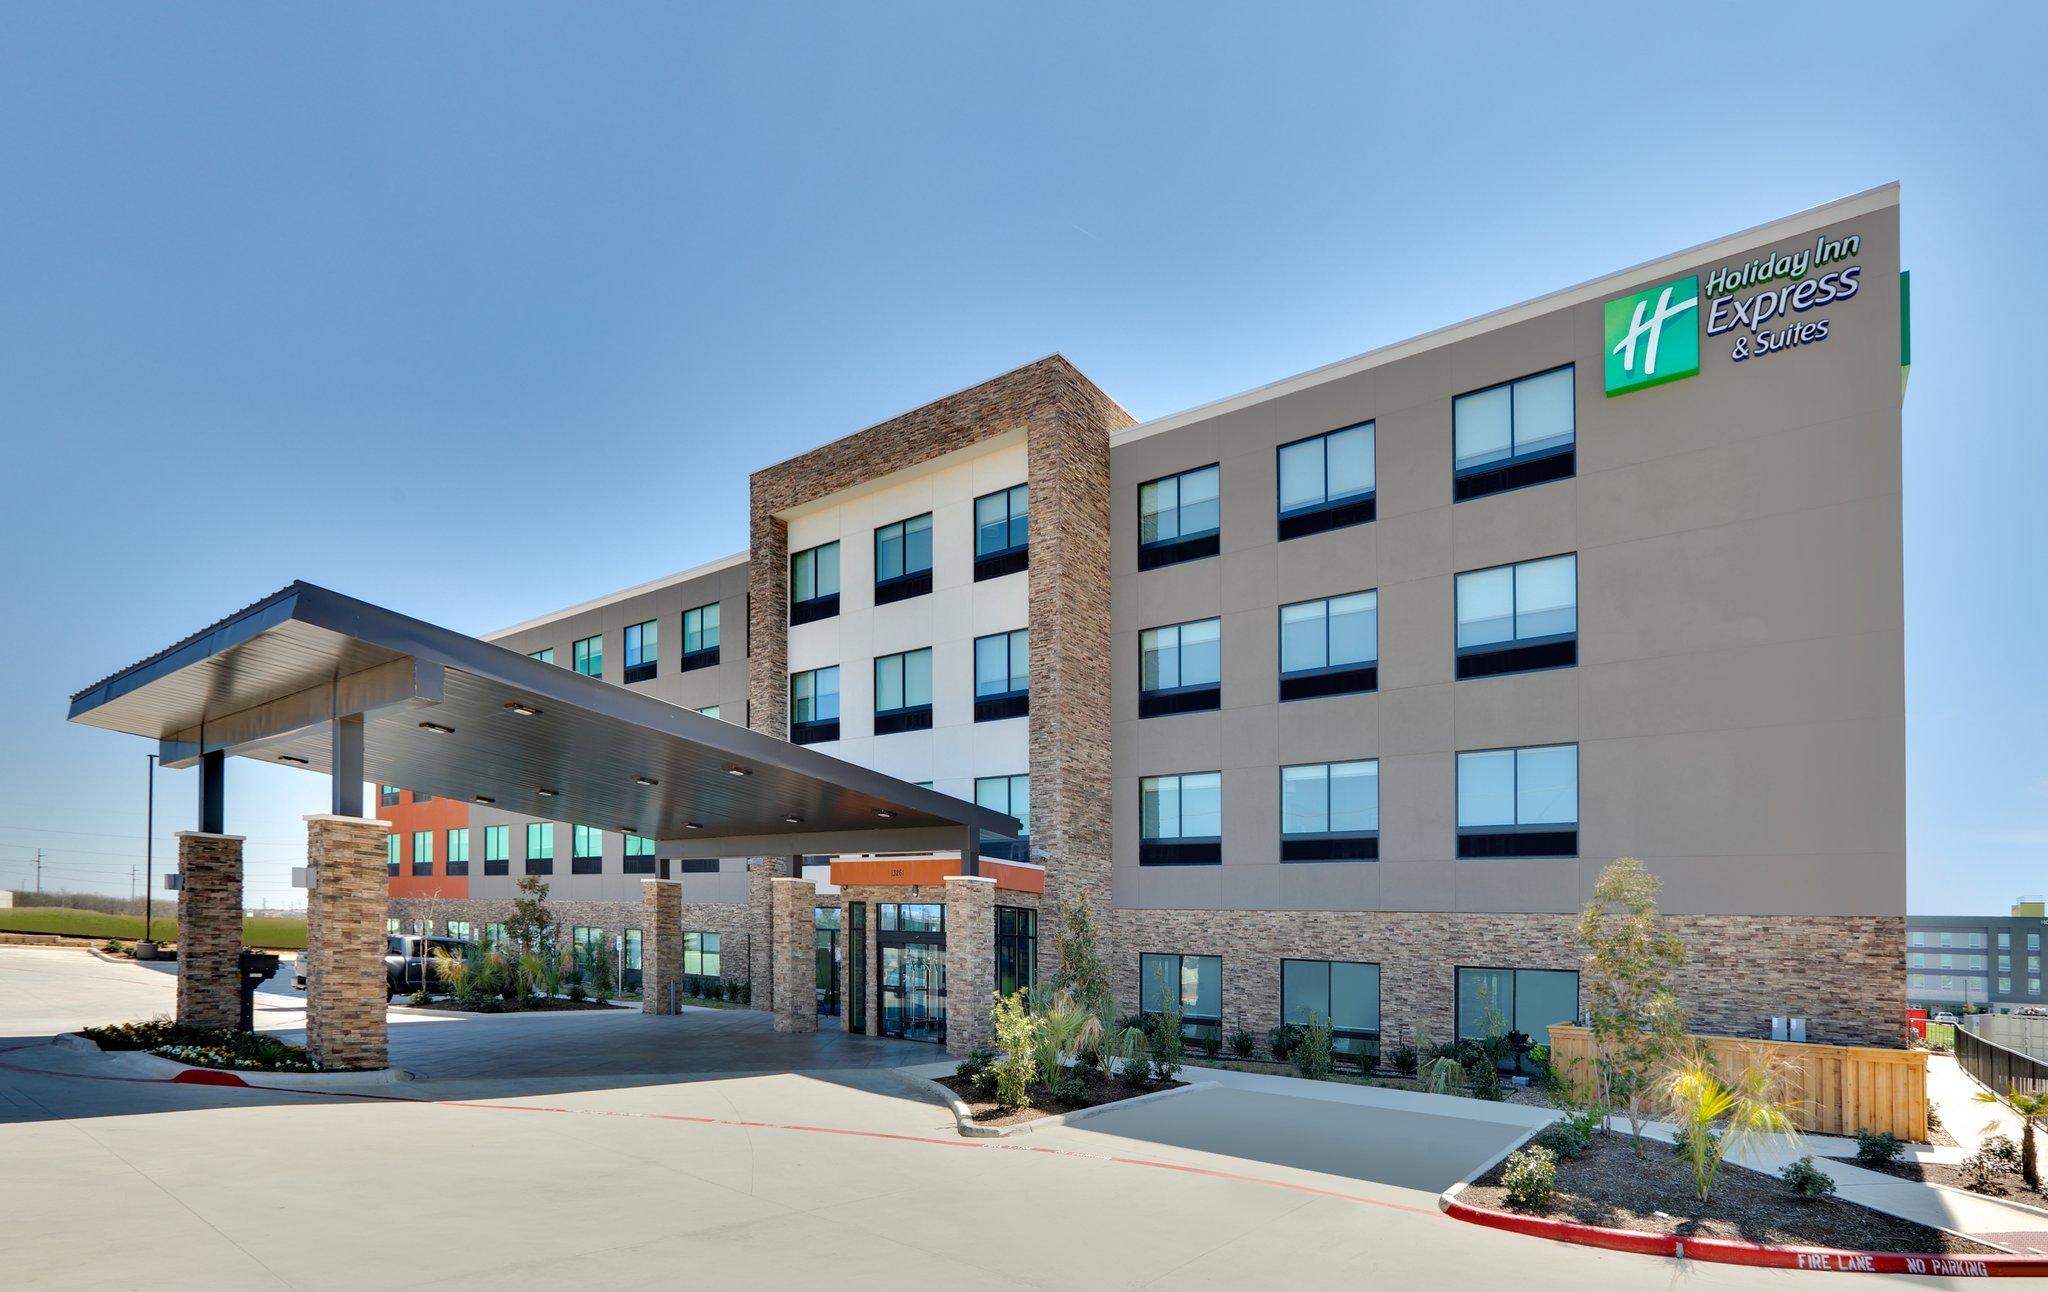 Holiday Inn Express & Suites Fort Worth North - Northlake in Denton, TX